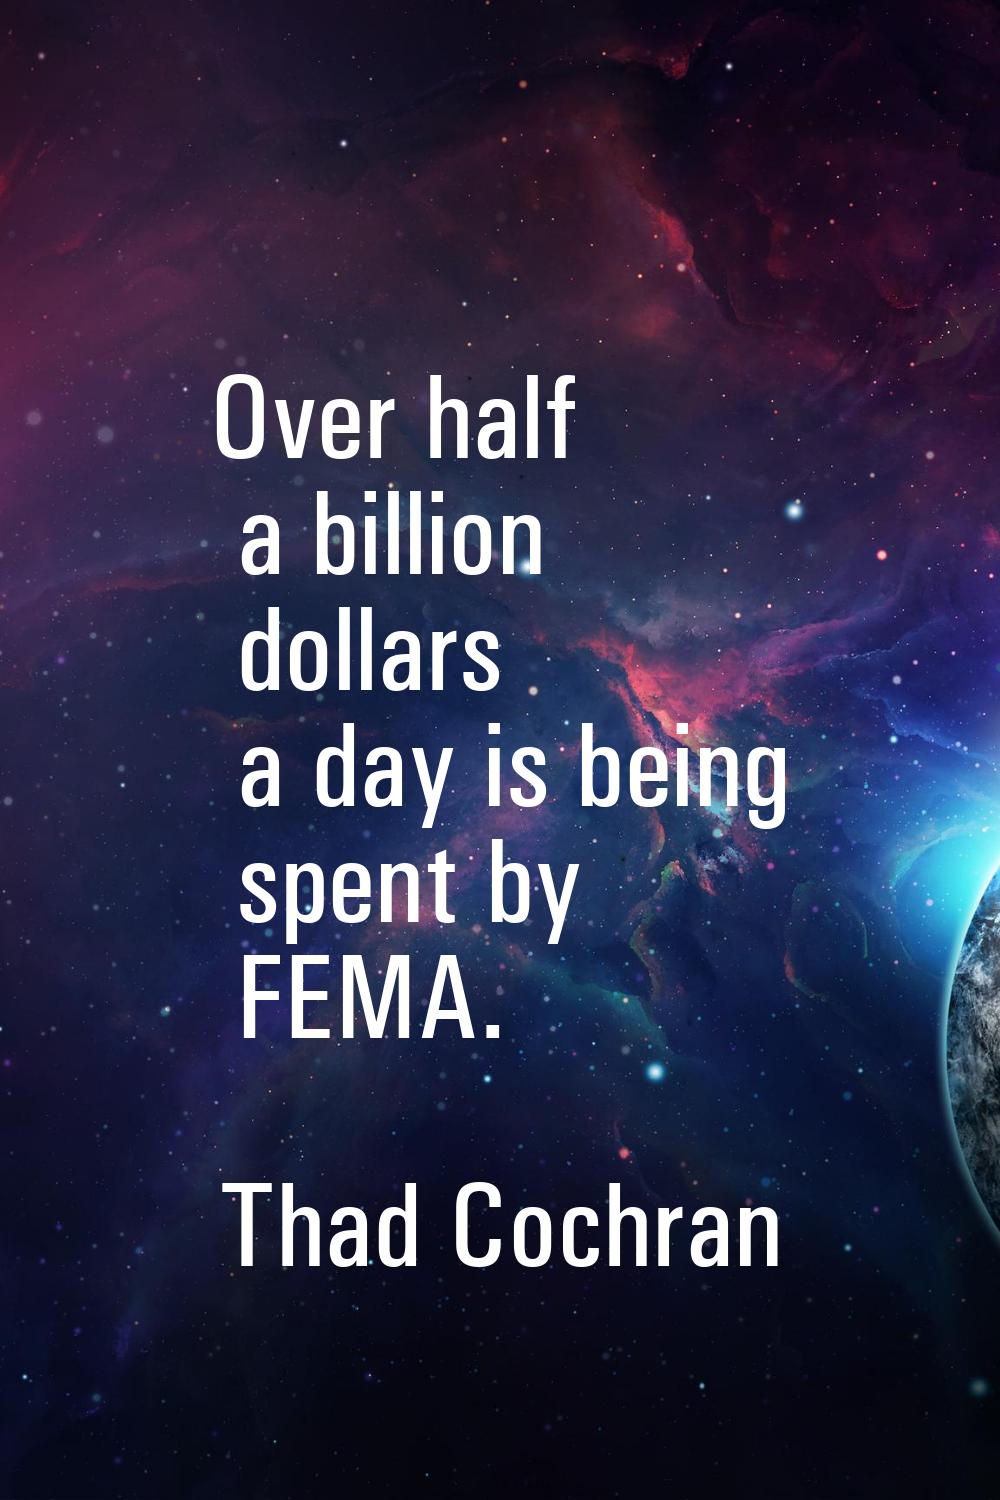 Over half a billion dollars a day is being spent by FEMA.